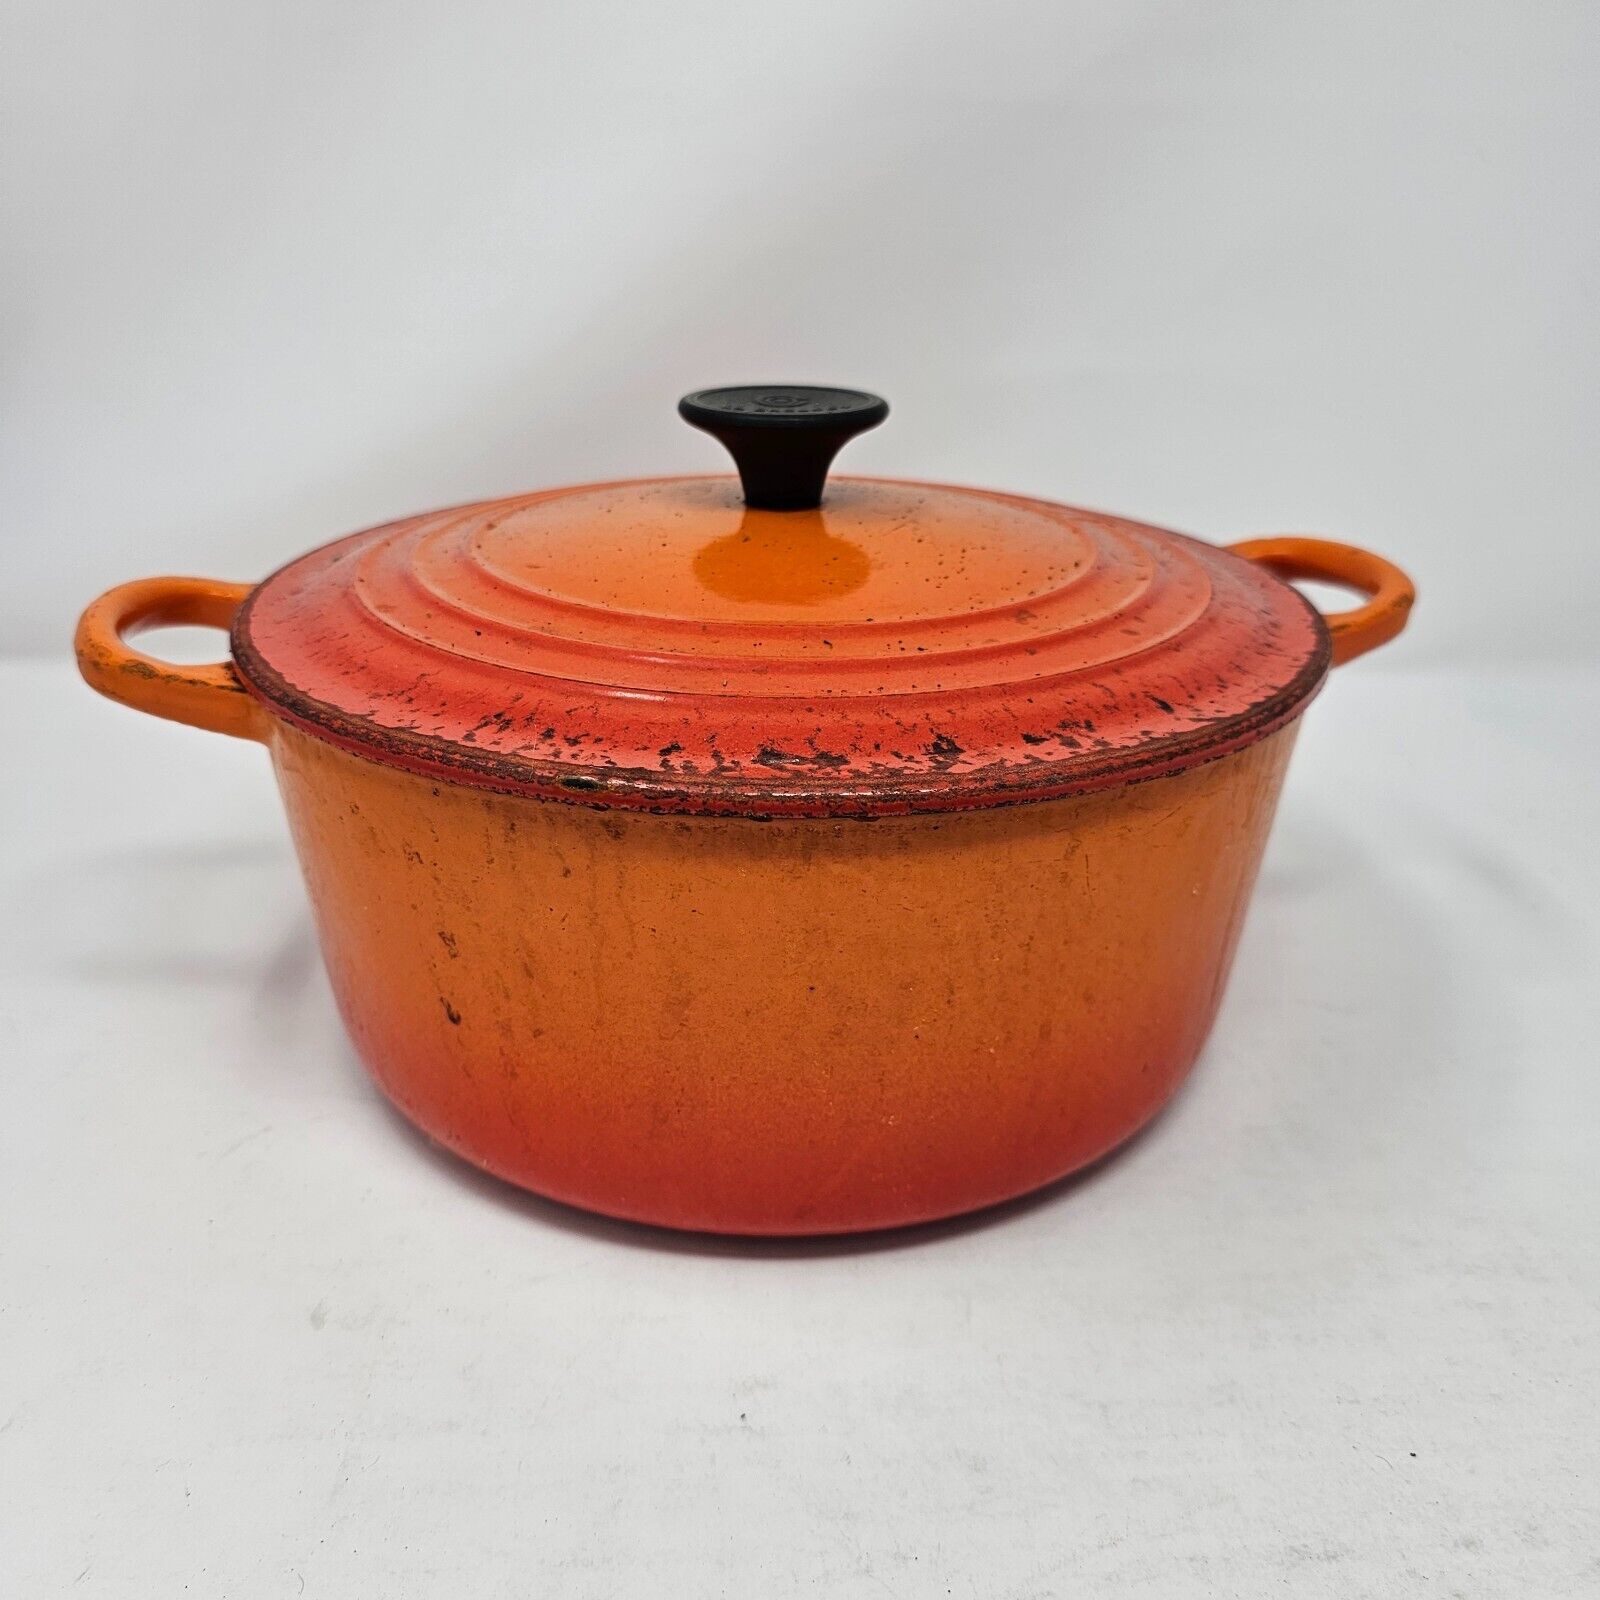 Le Creuset Enameled Cast Iron 3.5Qt Dutch Oven Casserole 22 Made in France